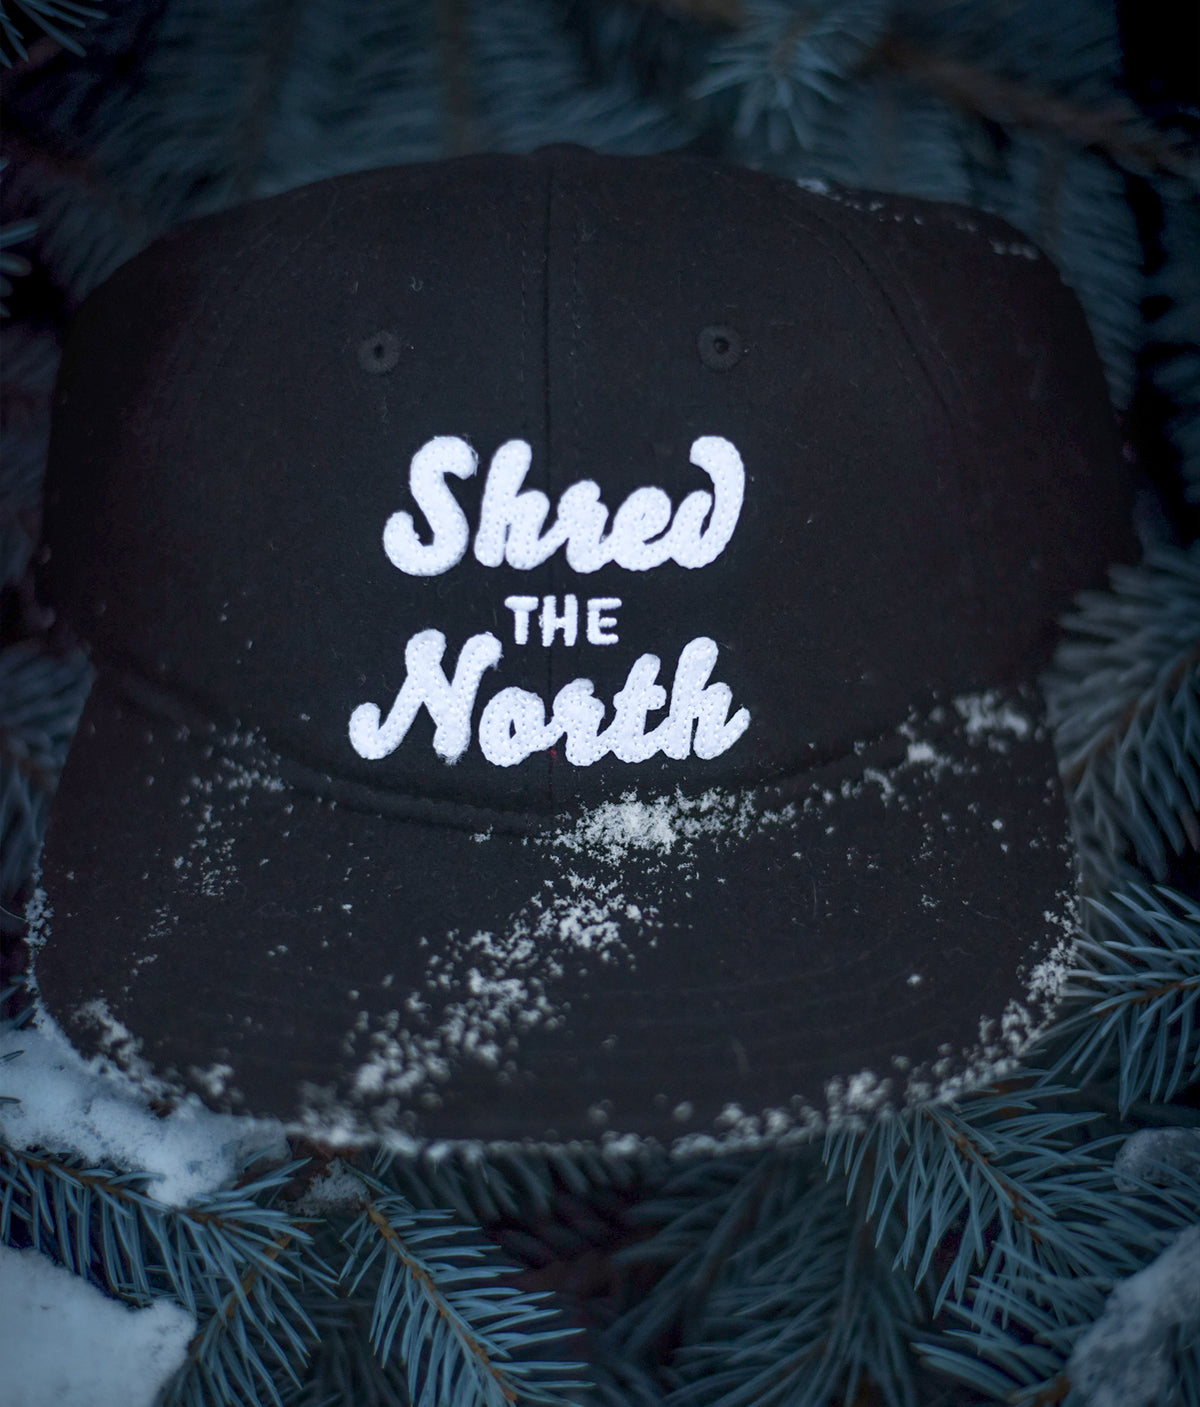 Shred the North Skater Hat